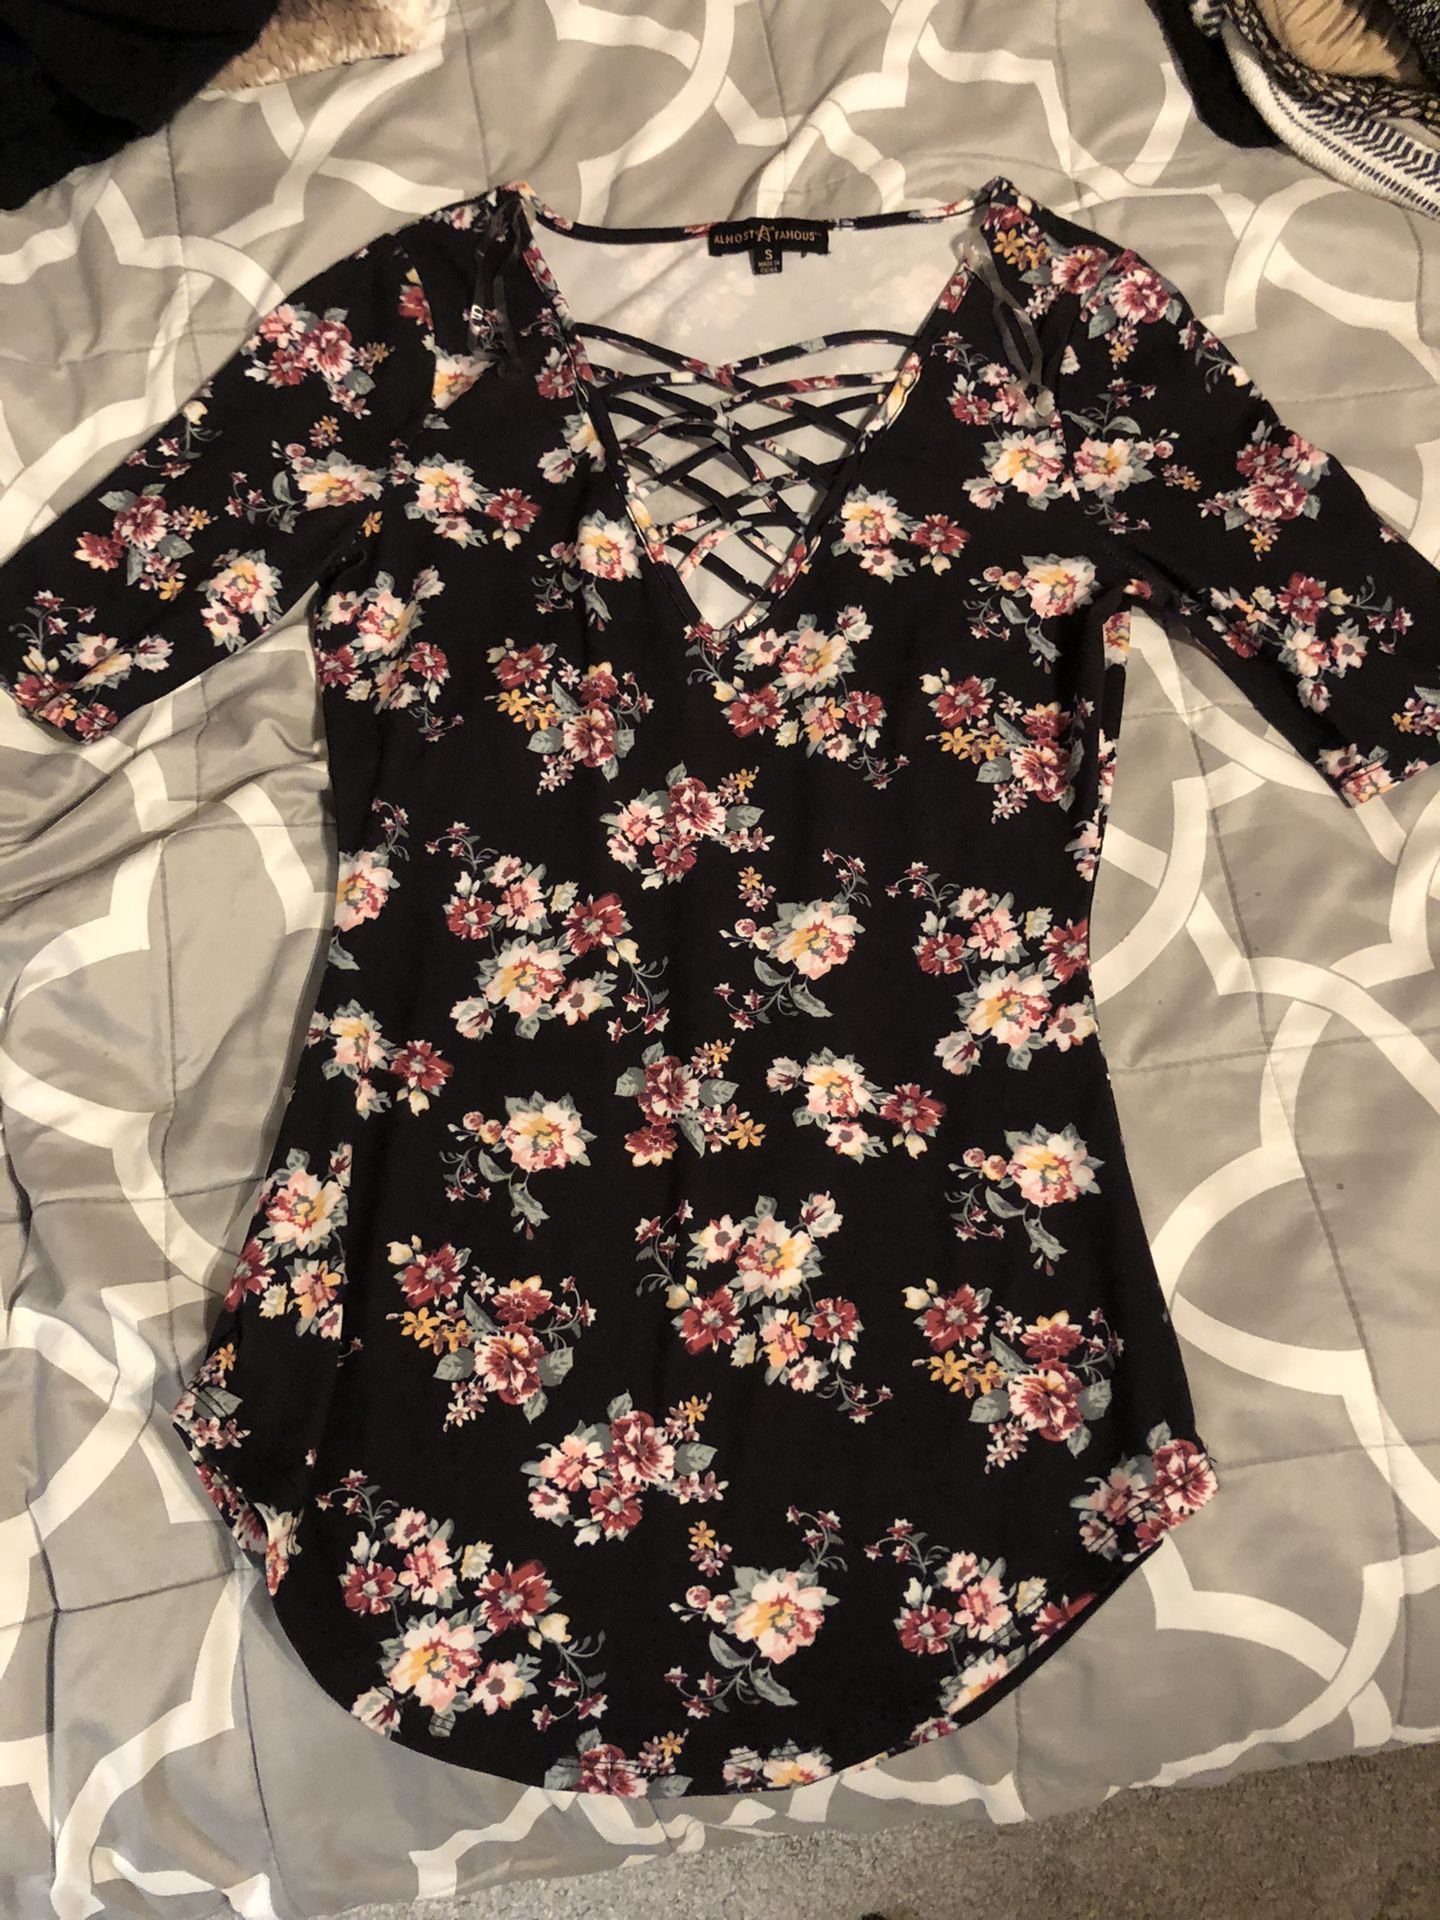 Almost Famous floral Top